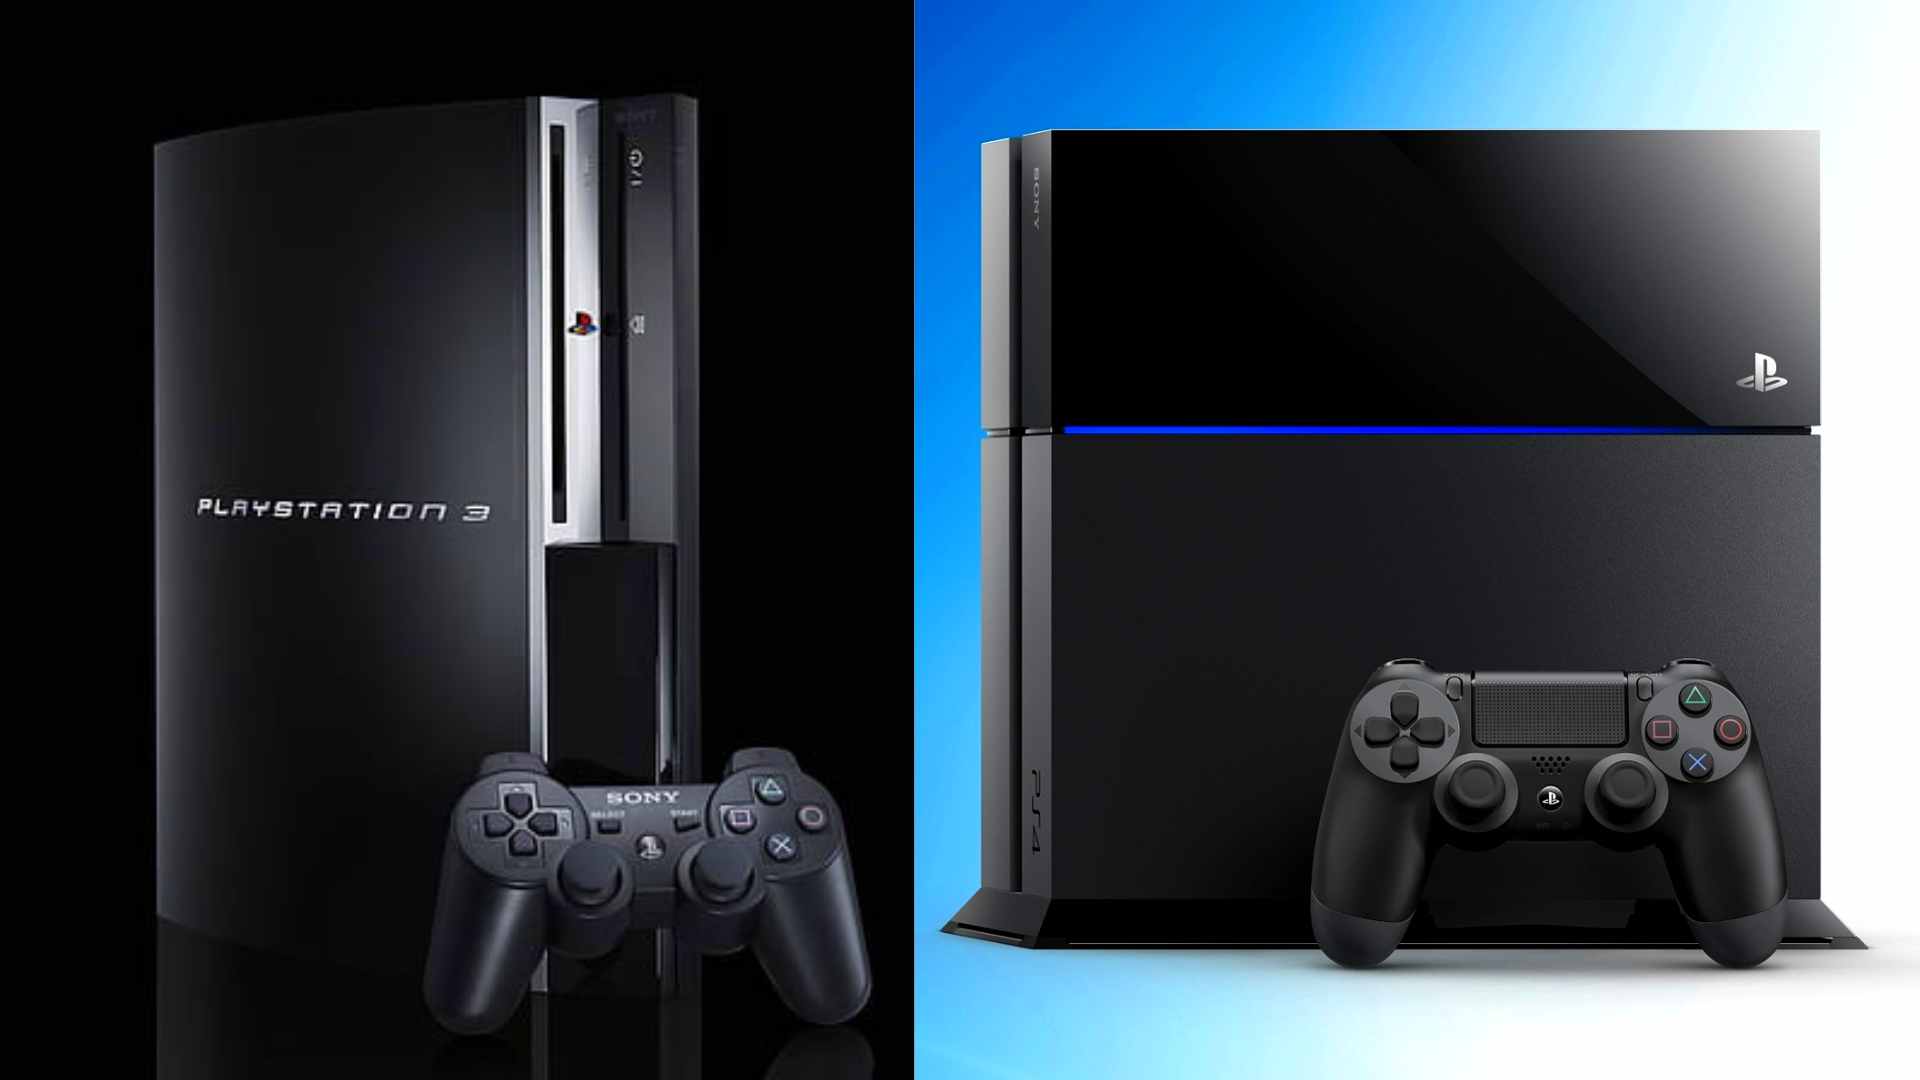 Despite having a slow start similar to PlayStation 5, the PS3 and PS4 had an intensive exclusive library within three years post-launch.